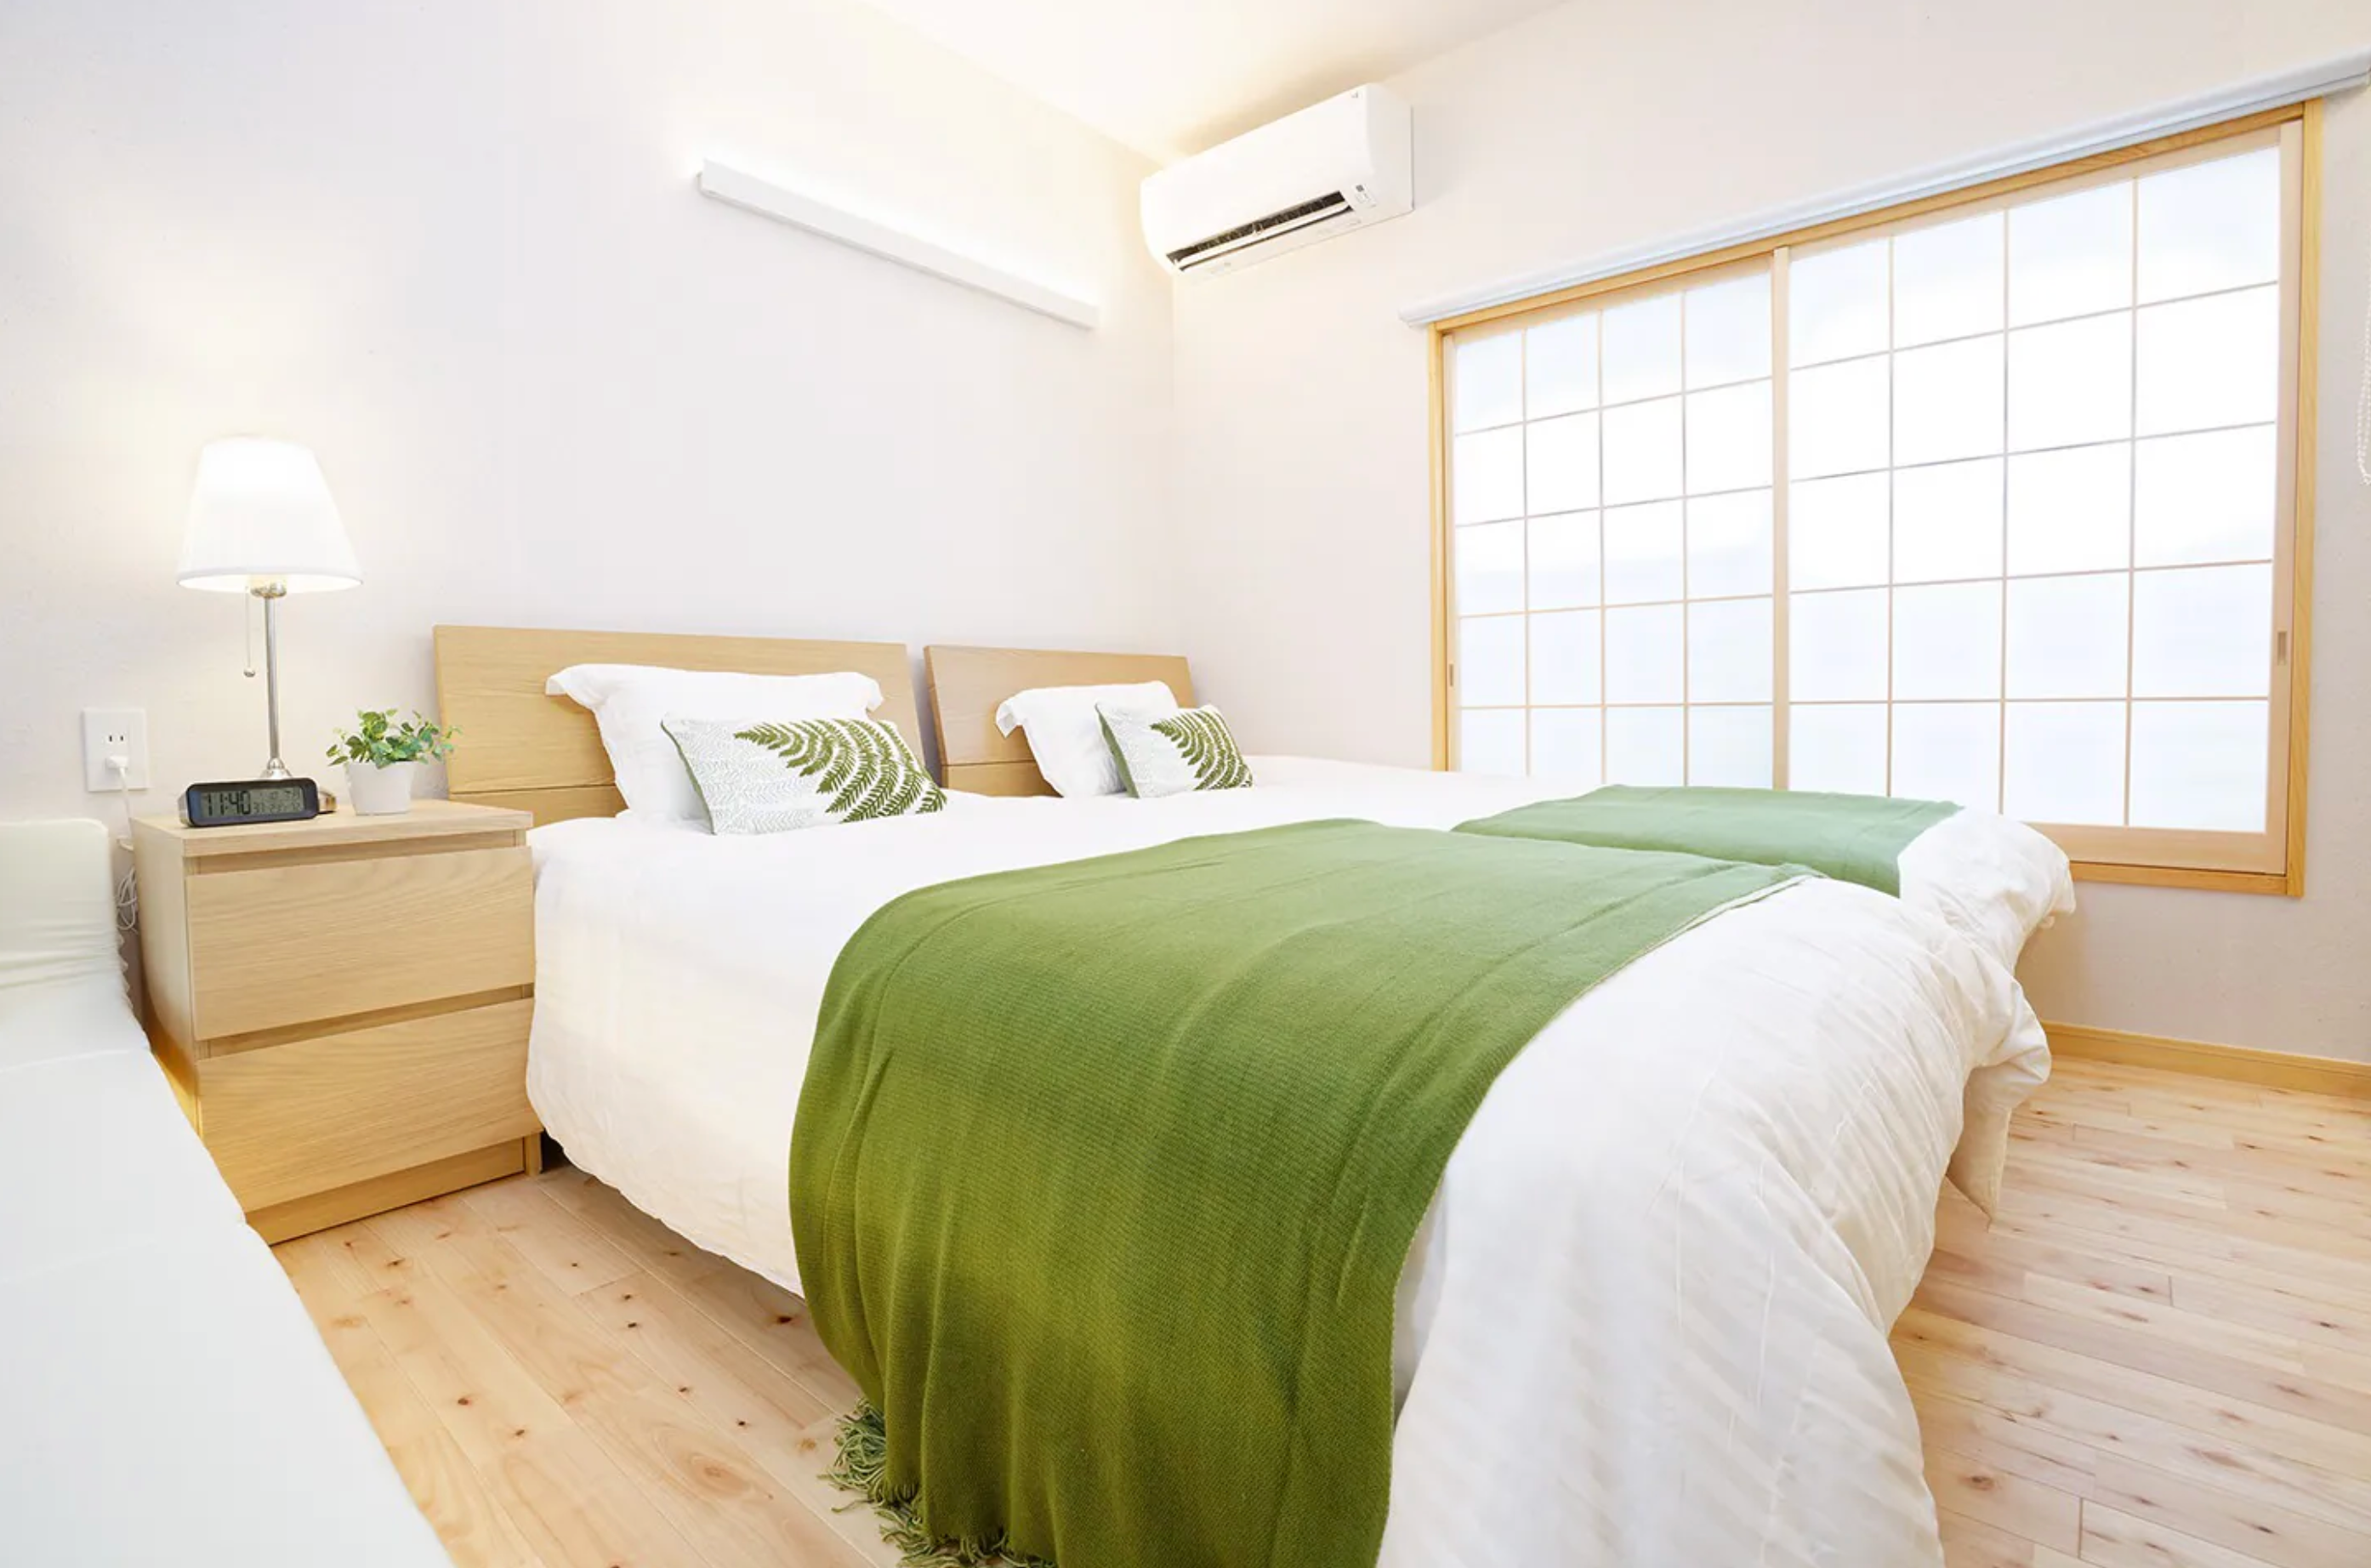 <p><strong>Bed & bath:</strong> 1 bedroom, 1 bath<br> <strong>Top amenities:</strong> Cherry blossom art, in-unit washer</p> <p>Celebrating Japan’s ubiquitous blush-colored flower, this one-bedroom wood-toned space features a large <a href="https://www.cntraveler.com/gallery/best-places-to-see-cherry-blossoms-in-japan?mbid=synd_msn_rss&utm_source=msn&utm_medium=syndication">cherry blossom</a> painting in the living room and another on the shower tiles in the bathroom. Spread across two brightly lit levels, sleeping accommodations include two futons on traditional Japanese tatami mats and two single beds. The full bathroom has a comfortably-sized shower and various bath products, and a minimalist kitchen with a hot plate, small fridge, and microwave available for guests who plan to cook. Other amenities provided include a USB adapter, hair dryer, bath towels, face towels, and laundry detergent for the in-unit washer. Conveniently located near Asakusa, the nearest train station is 10 minutes away on foot and the convenience store, Lawson, is just a few steps away.</p> <div class="callout"><p><a href="https://cna.st/affiliate-link/2uxxCQ7Rfr7UbY81Z3FnBafdqPBY3GRqSxsAHWCo9iGCvJNhBcsSWhndBYcBwkCxW5zrkGs5xG3hx5qJXnBSnKbozL4AnZsKSmuimnF2KFgcBHXnZ7CGg3HC72DUYVBoJLT55ck5v" rel="sponsored" title="Book now at Airbnb">Book now at Airbnb</a></p> </div><p>Sign up to receive the latest news, expert tips, and inspiration on all things travel</p><a href="https://www.cntraveler.com/newsletter/the-daily?sourceCode=msnsend">Inspire Me</a>